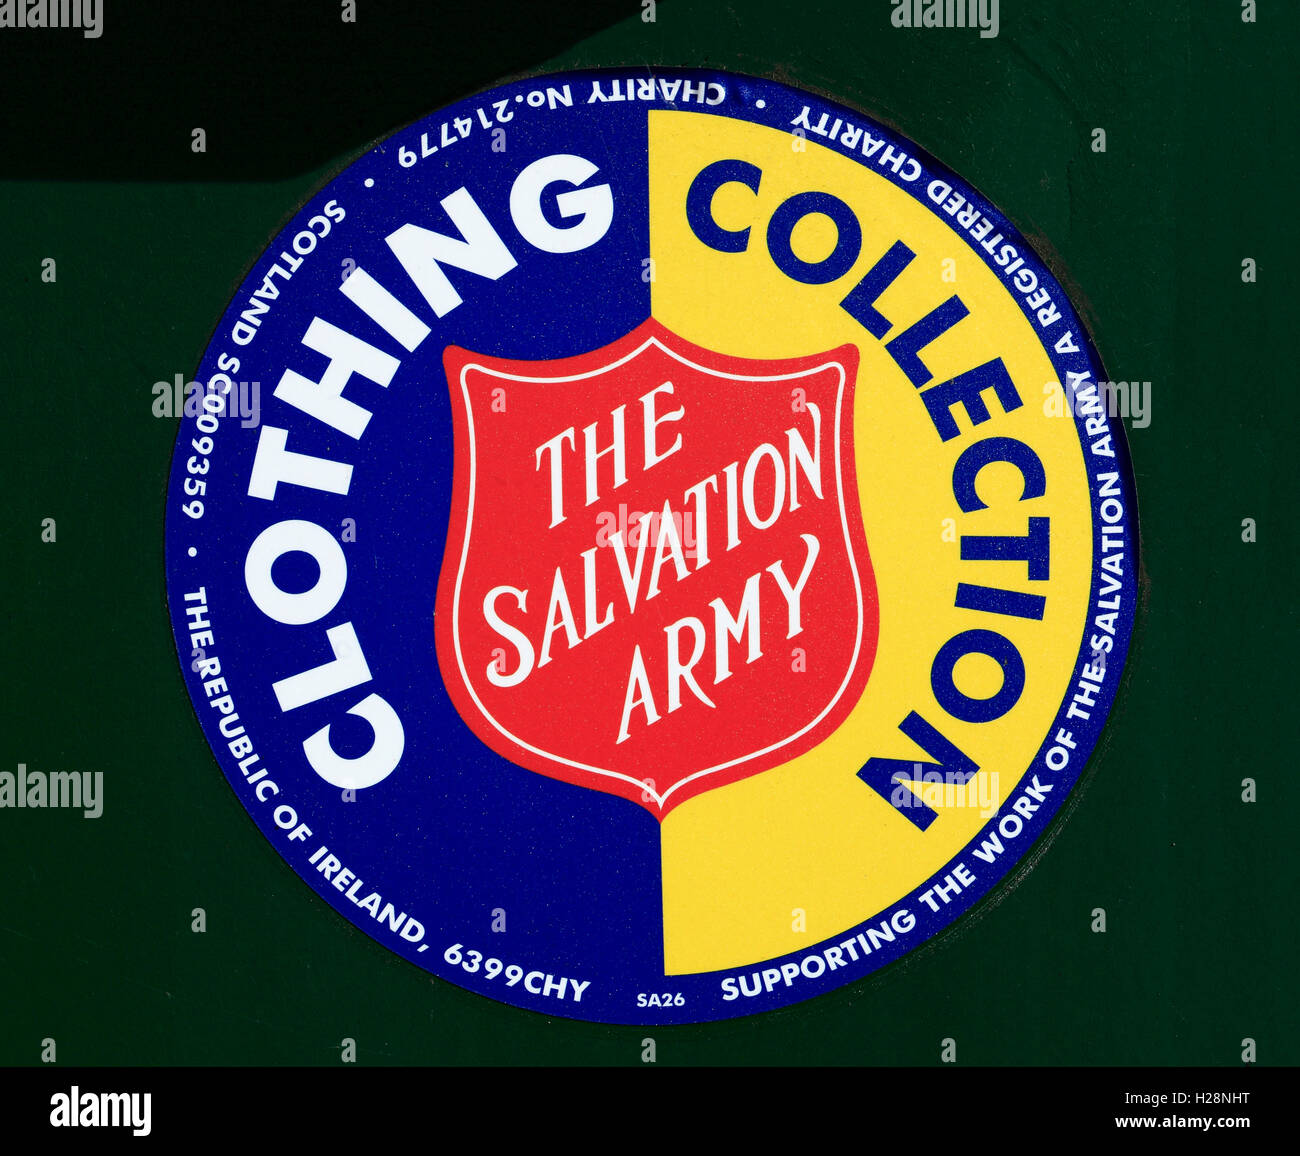 The Salvation Army Clothing Collection receptacle recycling charity donation donations UK charities Stock Photo